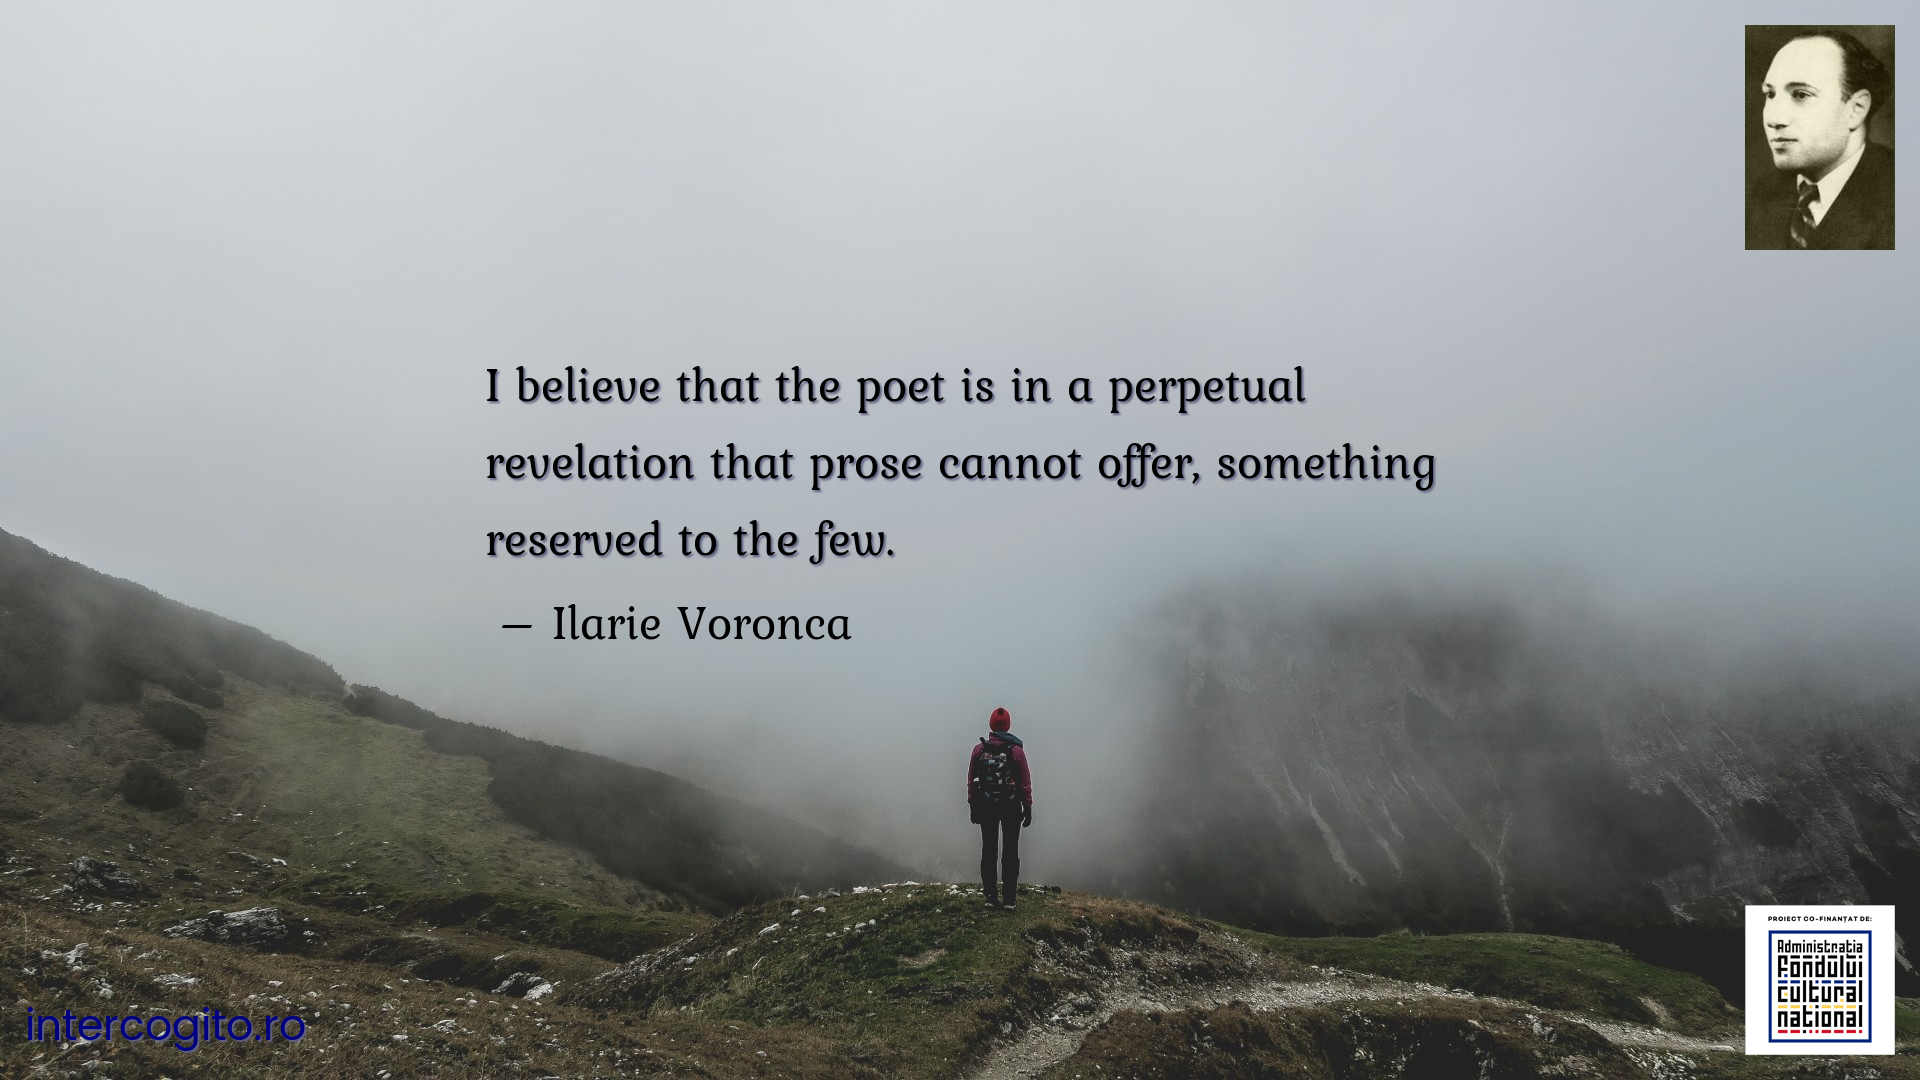 I believe that the poet is in a perpetual revelation that prose cannot offer, something reserved to the few.